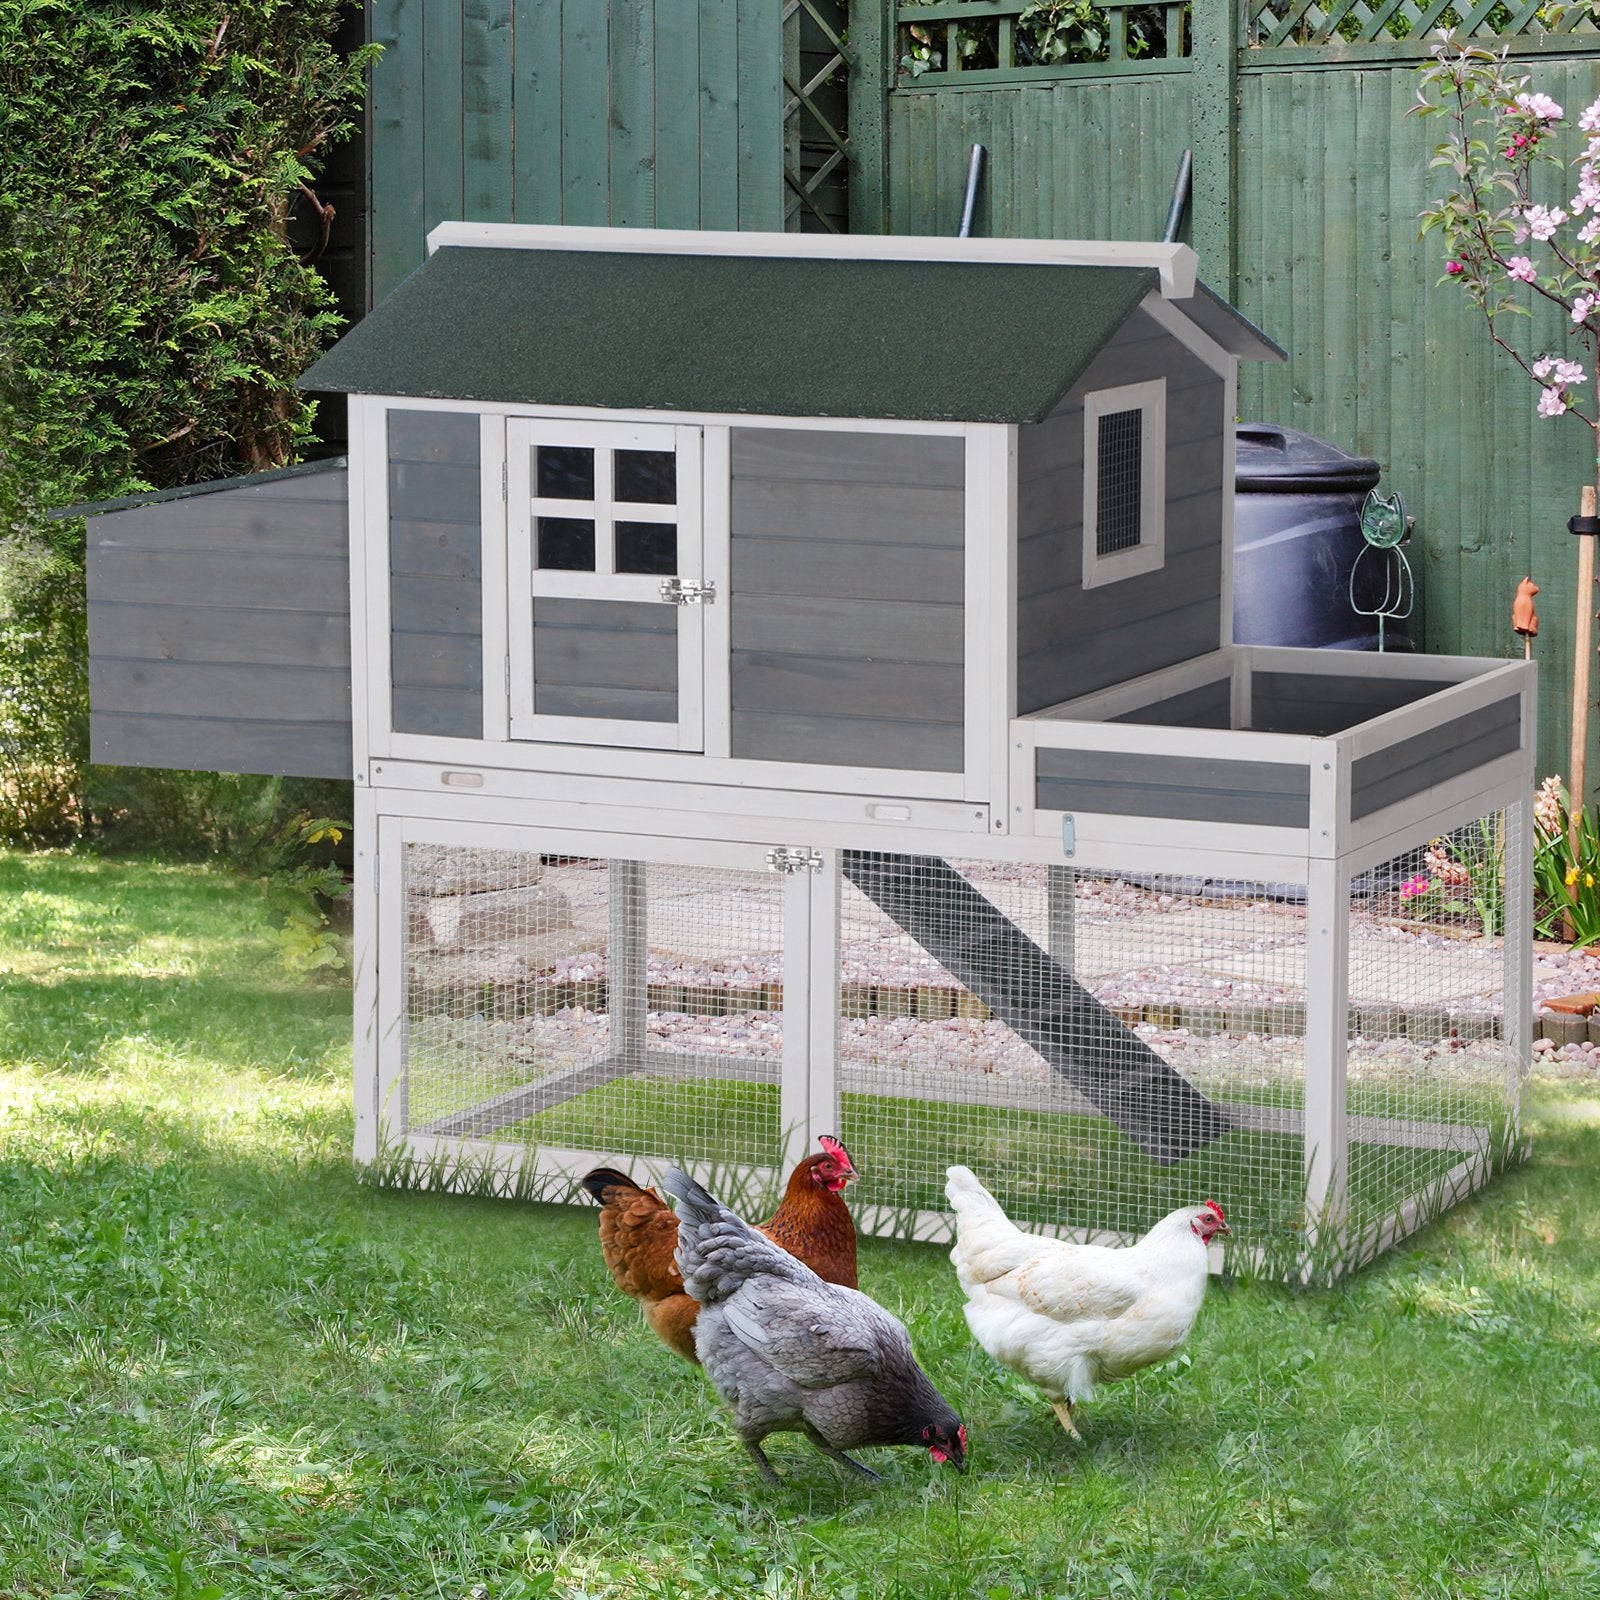 160cm Wooden Chicken Coop Hen Hutch Poultry House Nesting Cage Planting Box